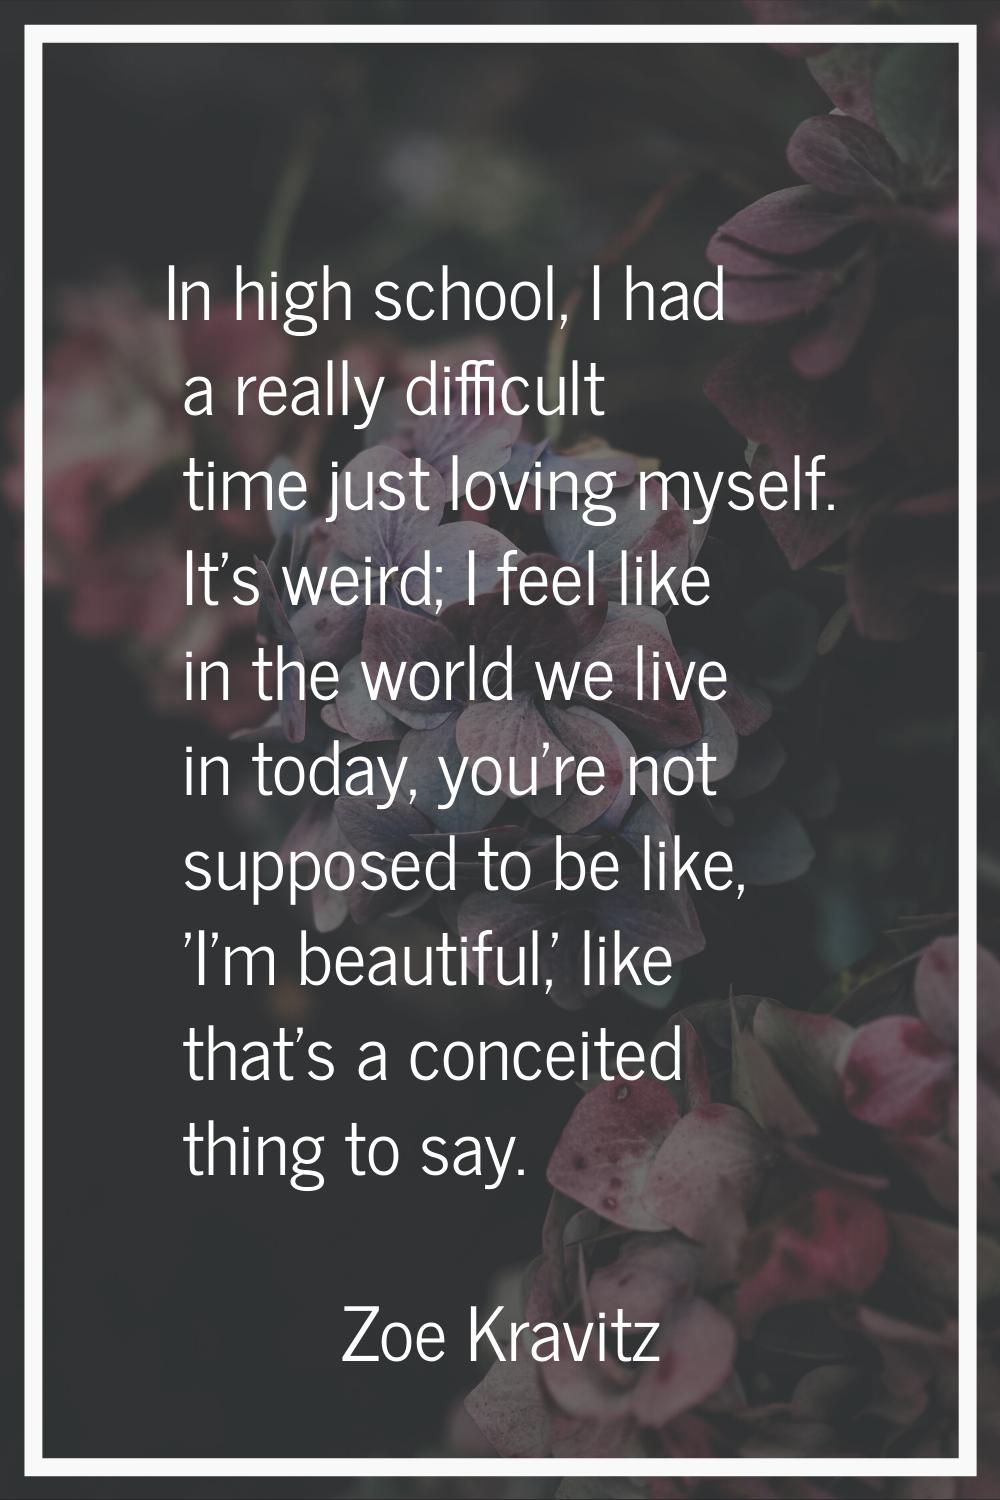 In high school, I had a really difficult time just loving myself. It's weird; I feel like in the wo